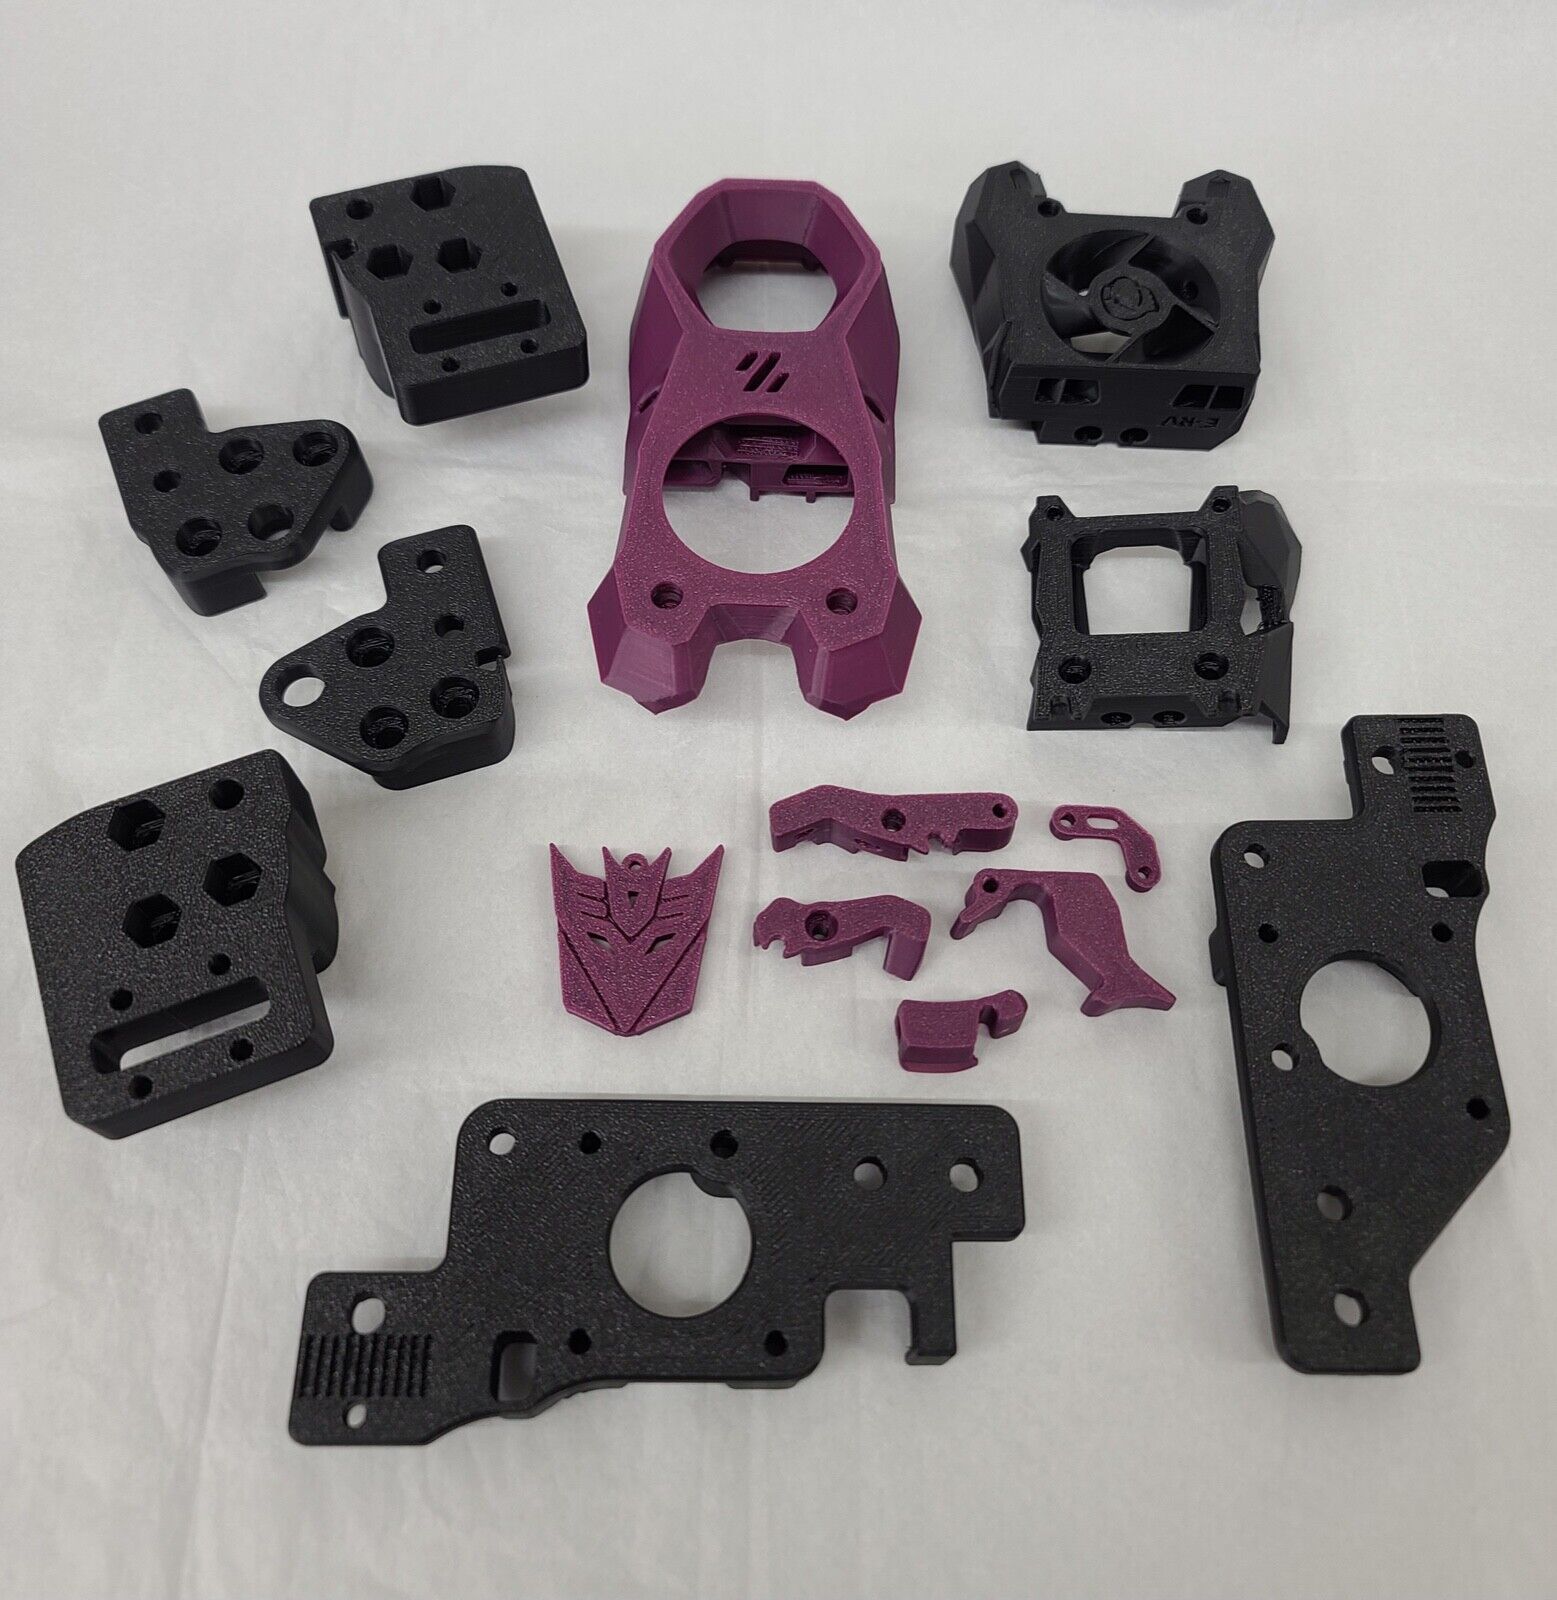 Voron 2.4 R2 or Trident Complete Printed Parts Set (ASA)